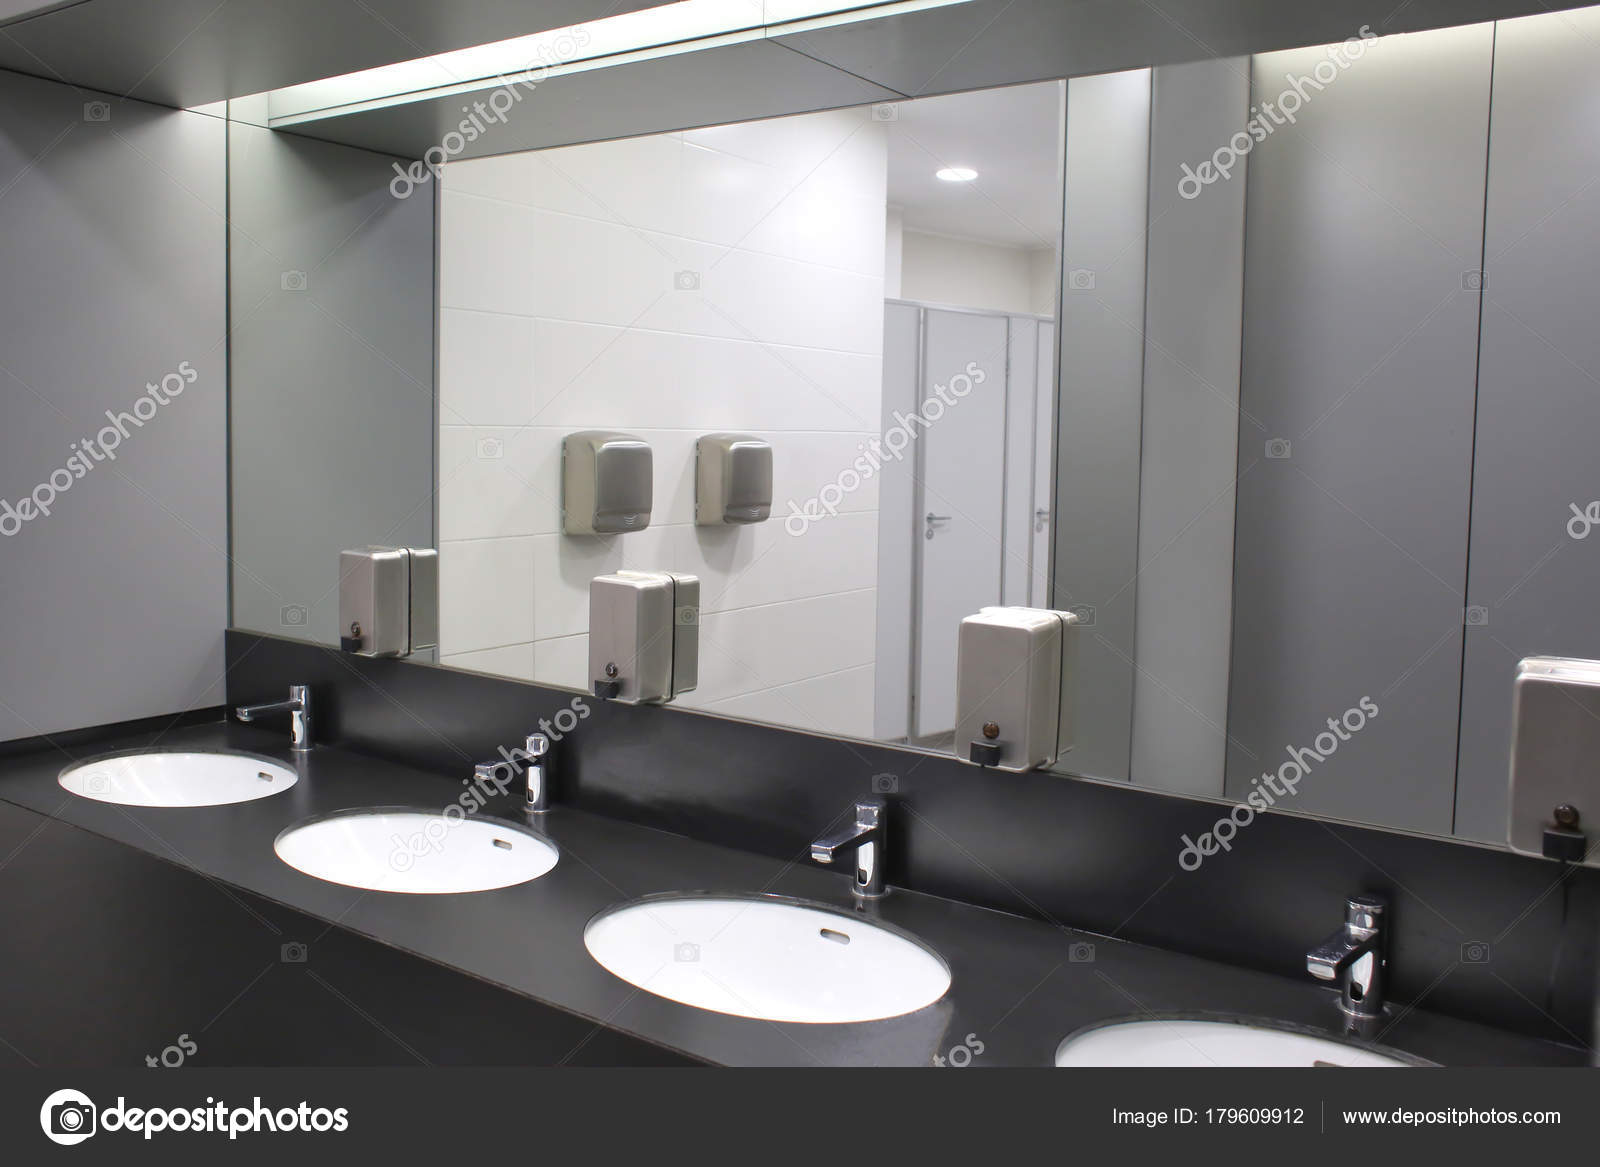 Modern Sinks With Mirror In Public Toilet Stock Photo